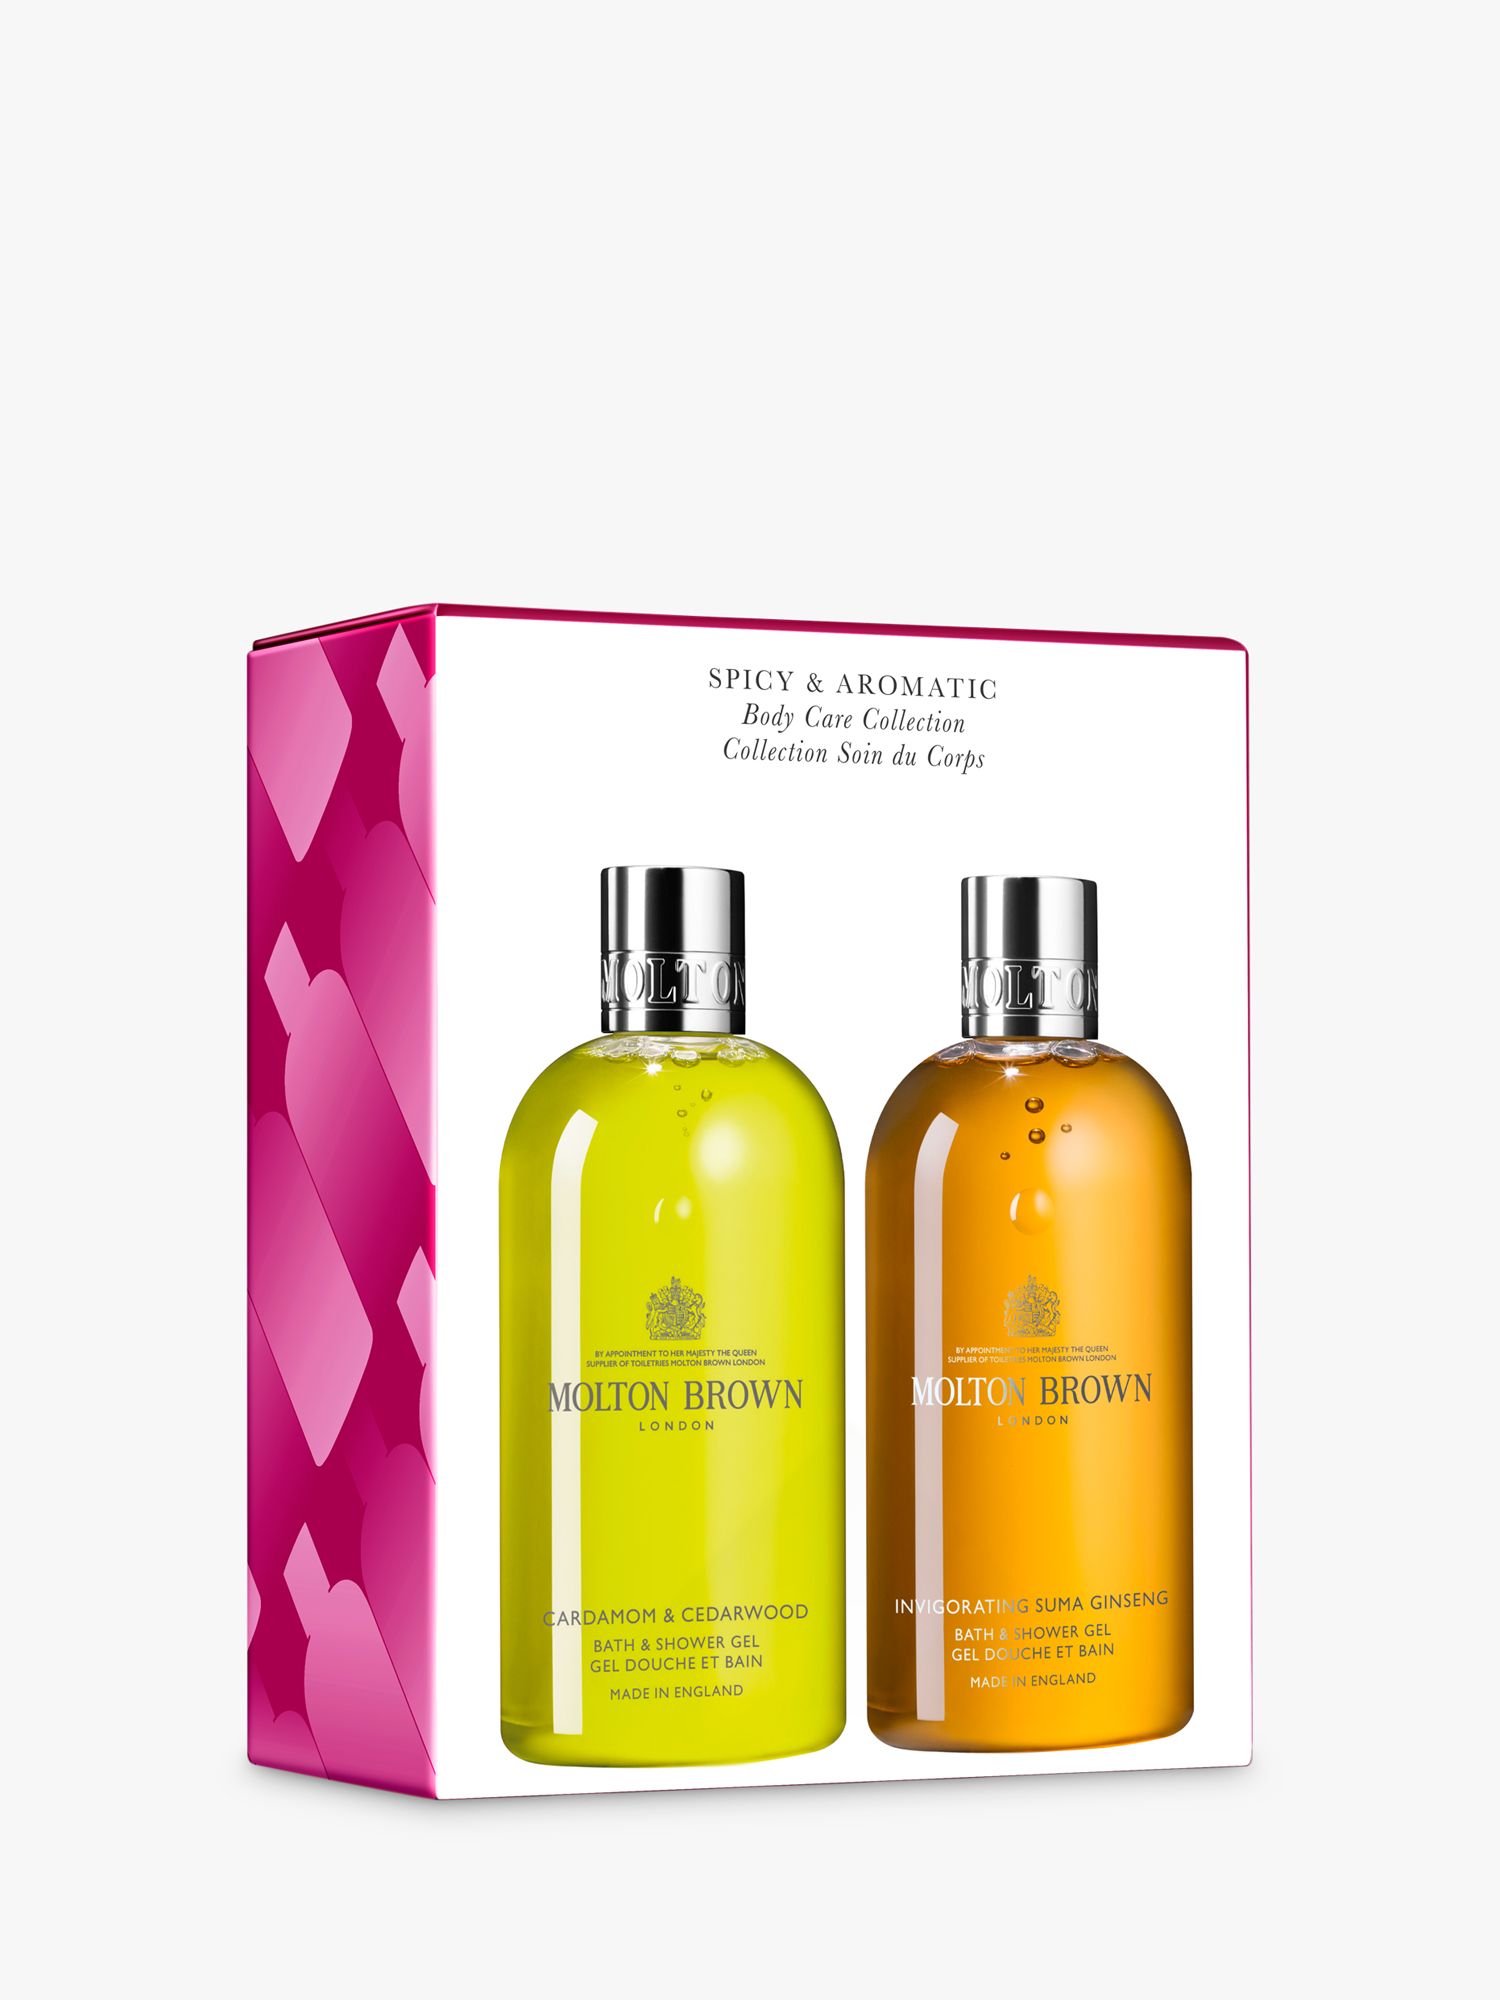 Molton Brown Spicy & Aromatic Body Care Collection 1